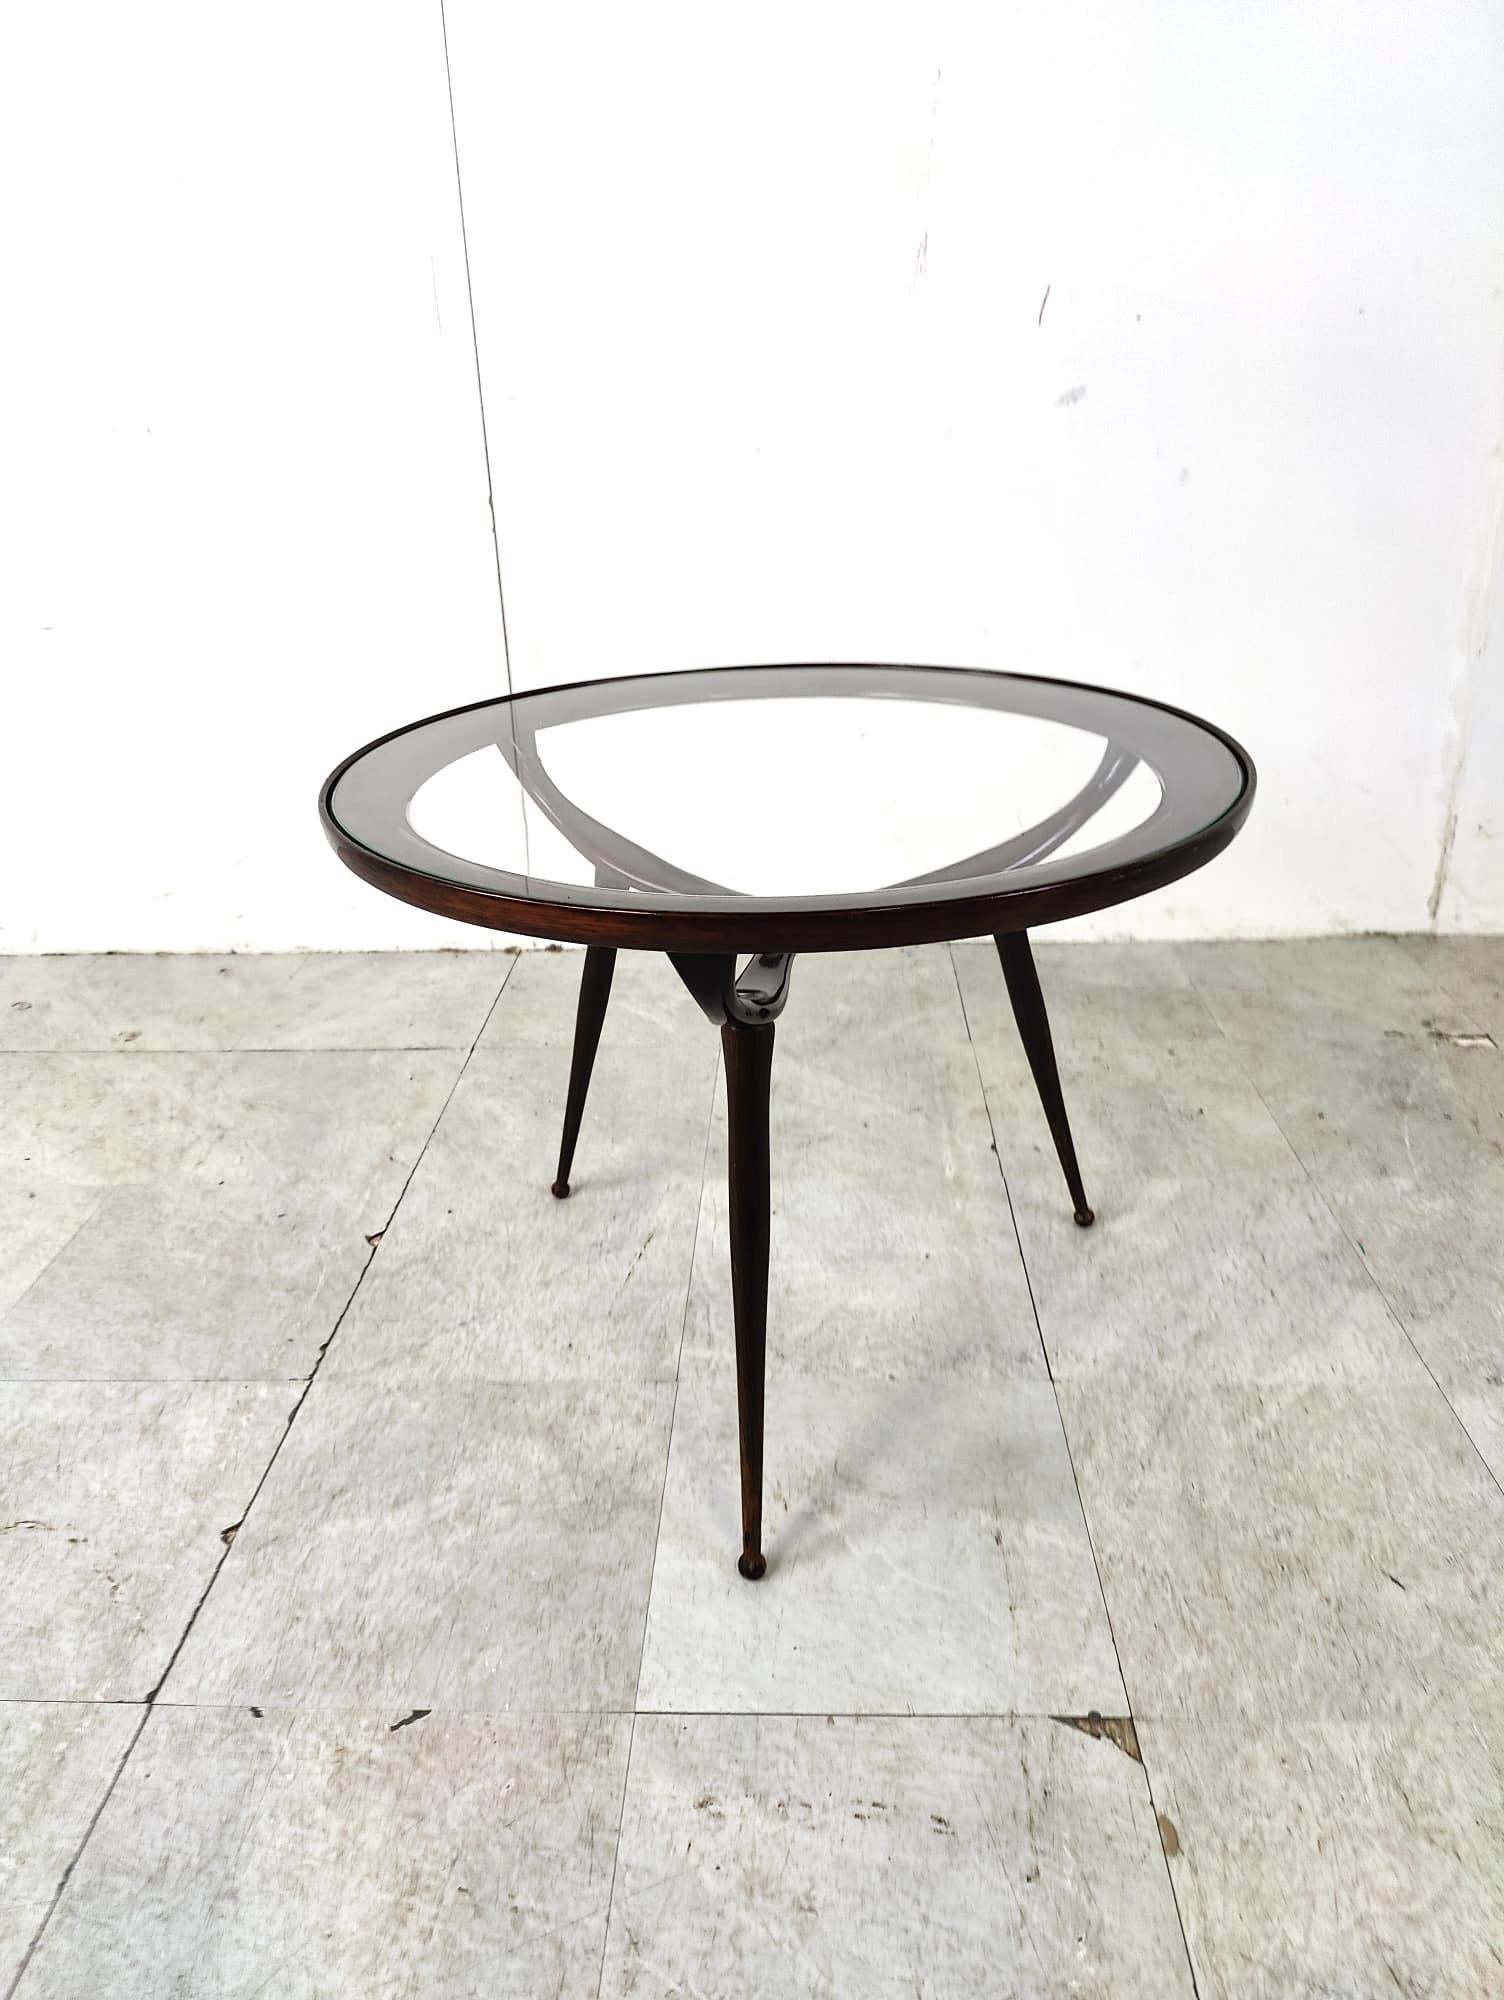 Mid century tripod coffee table by Cesare Lacca in rosewood.

Beautiful design, wonderfully crafted curvy wooden base and a clear round glass top.

1950s - Italy

Good condition

Dimensions:
Height: 50cm
Diameter: 67cm

Ref.: 105561